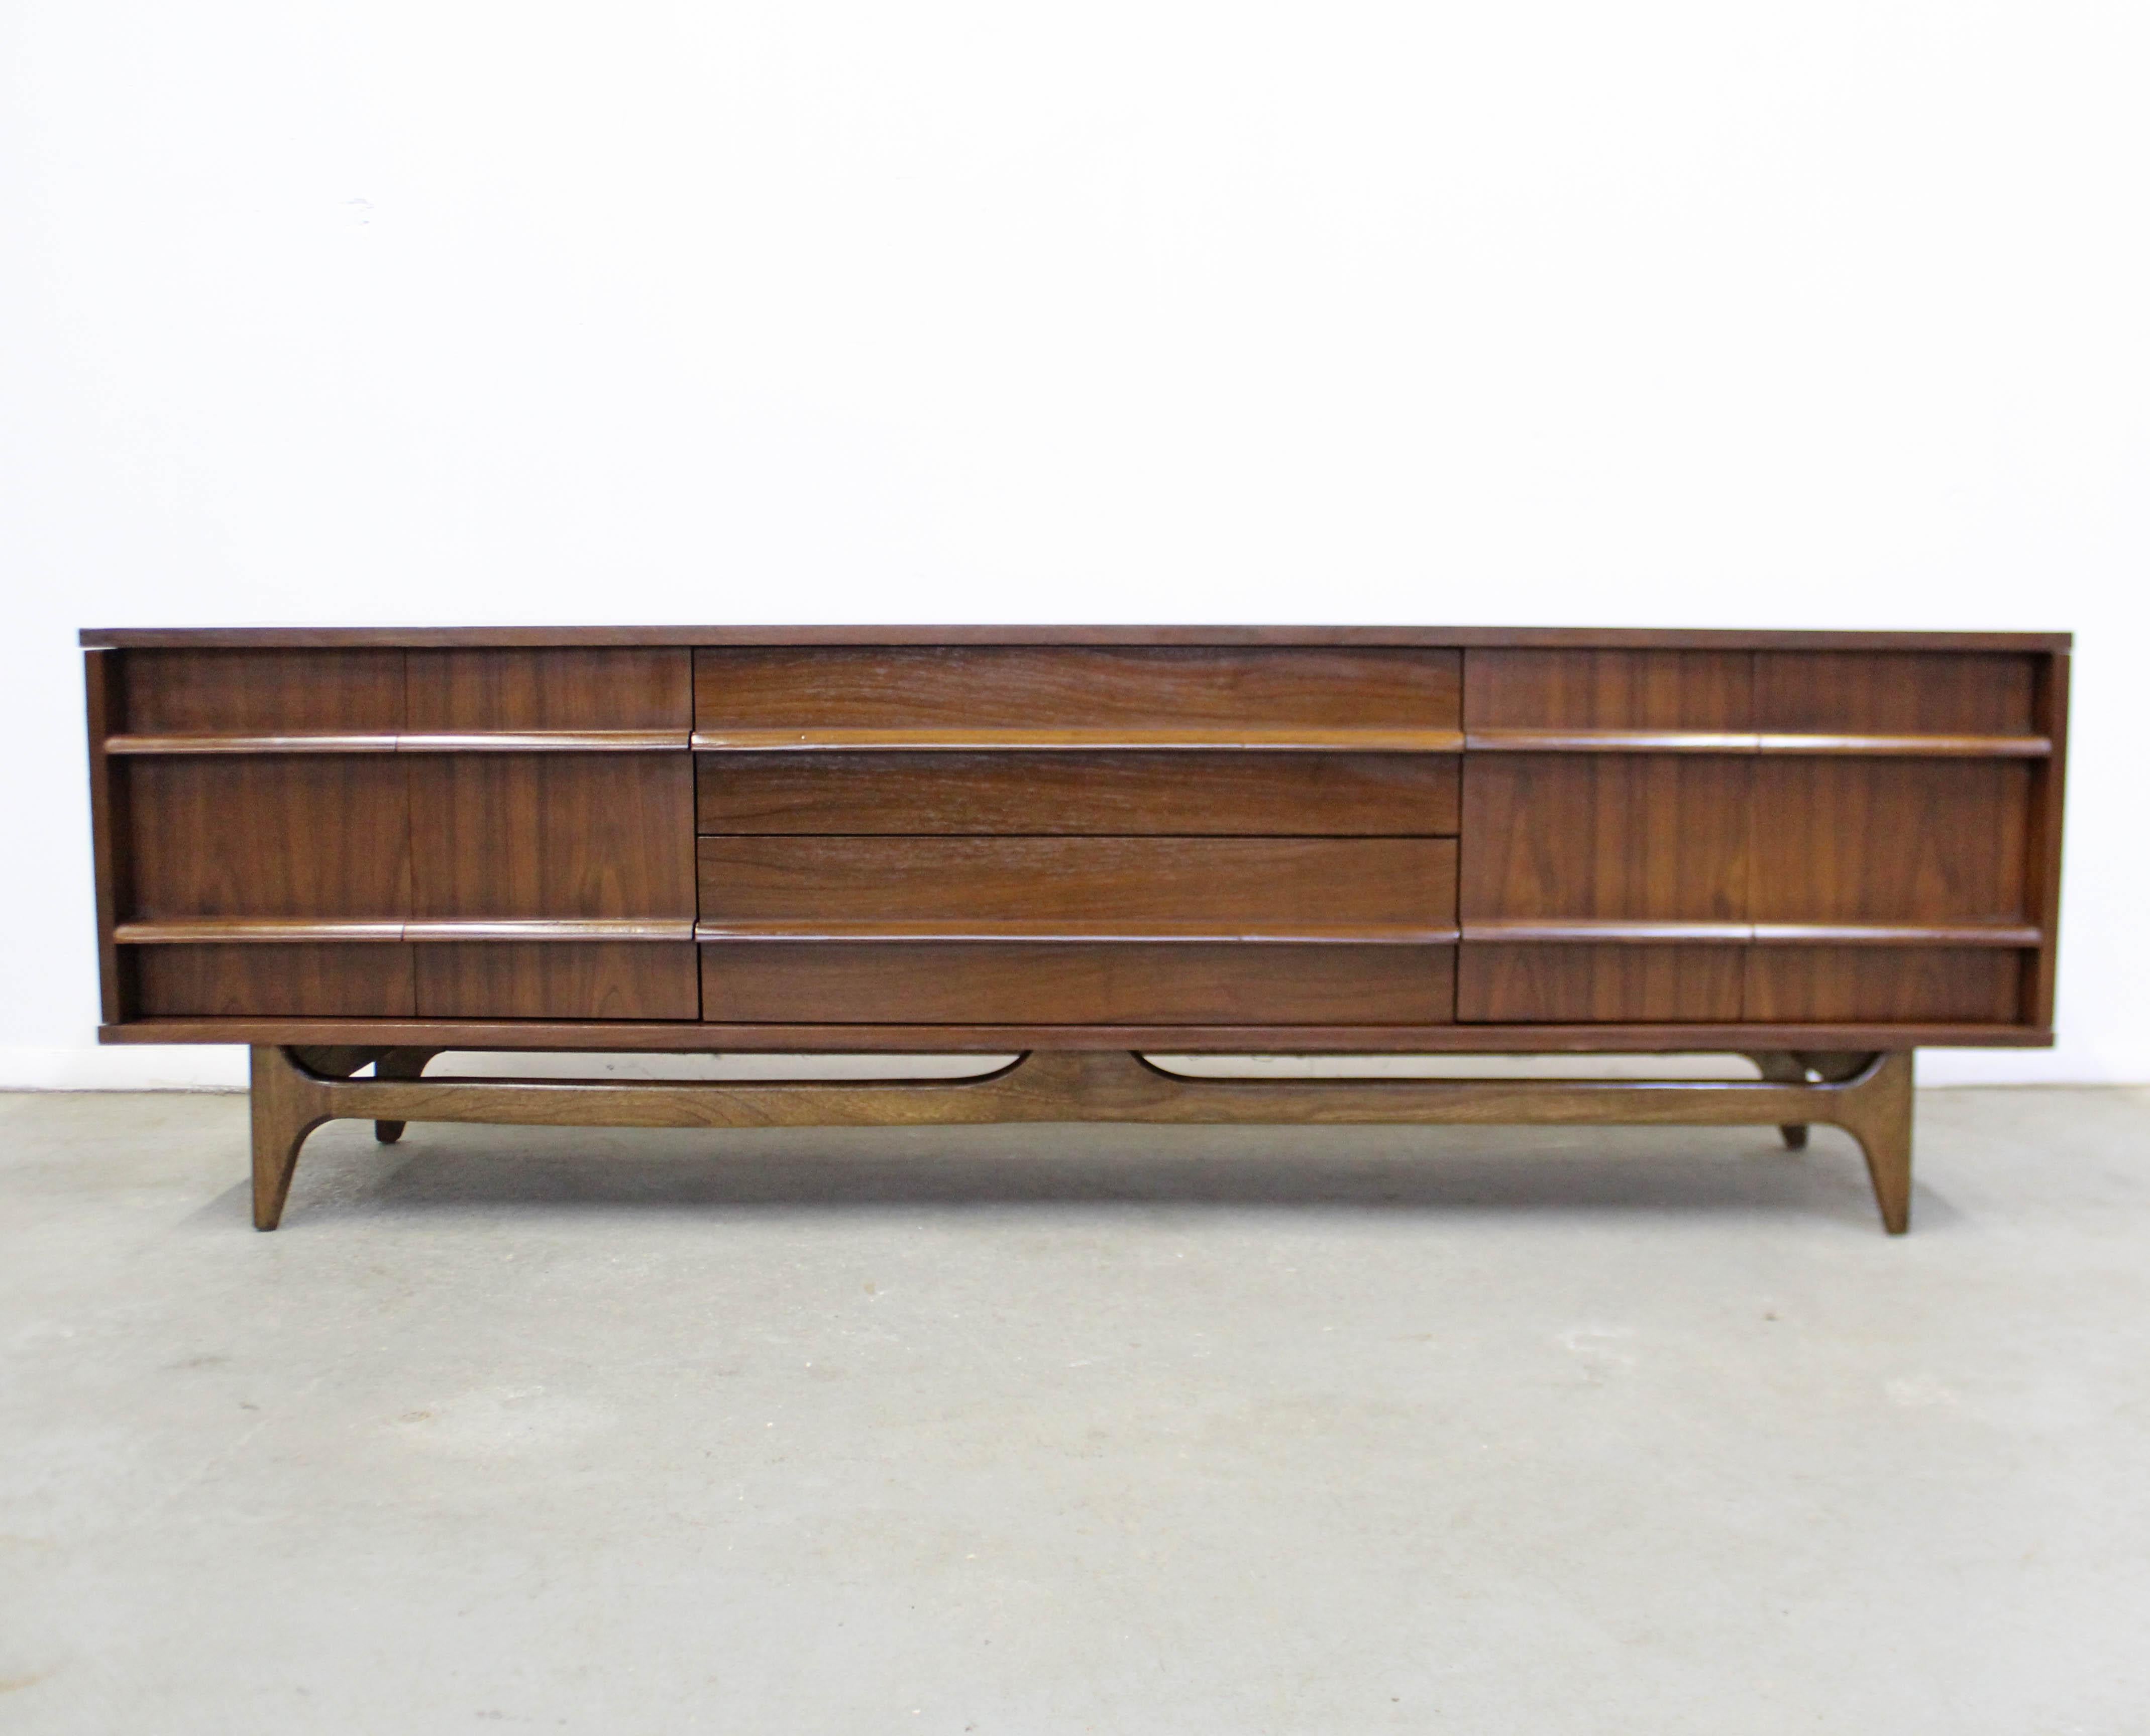 Offered is a vintage Mid-Century Modern concave front credenza with sculpted pulls made by Young Manufacturing. Features a concave front with two center drawers, bi-folding doors on the sides with inner storage. It is in overall good condition, has